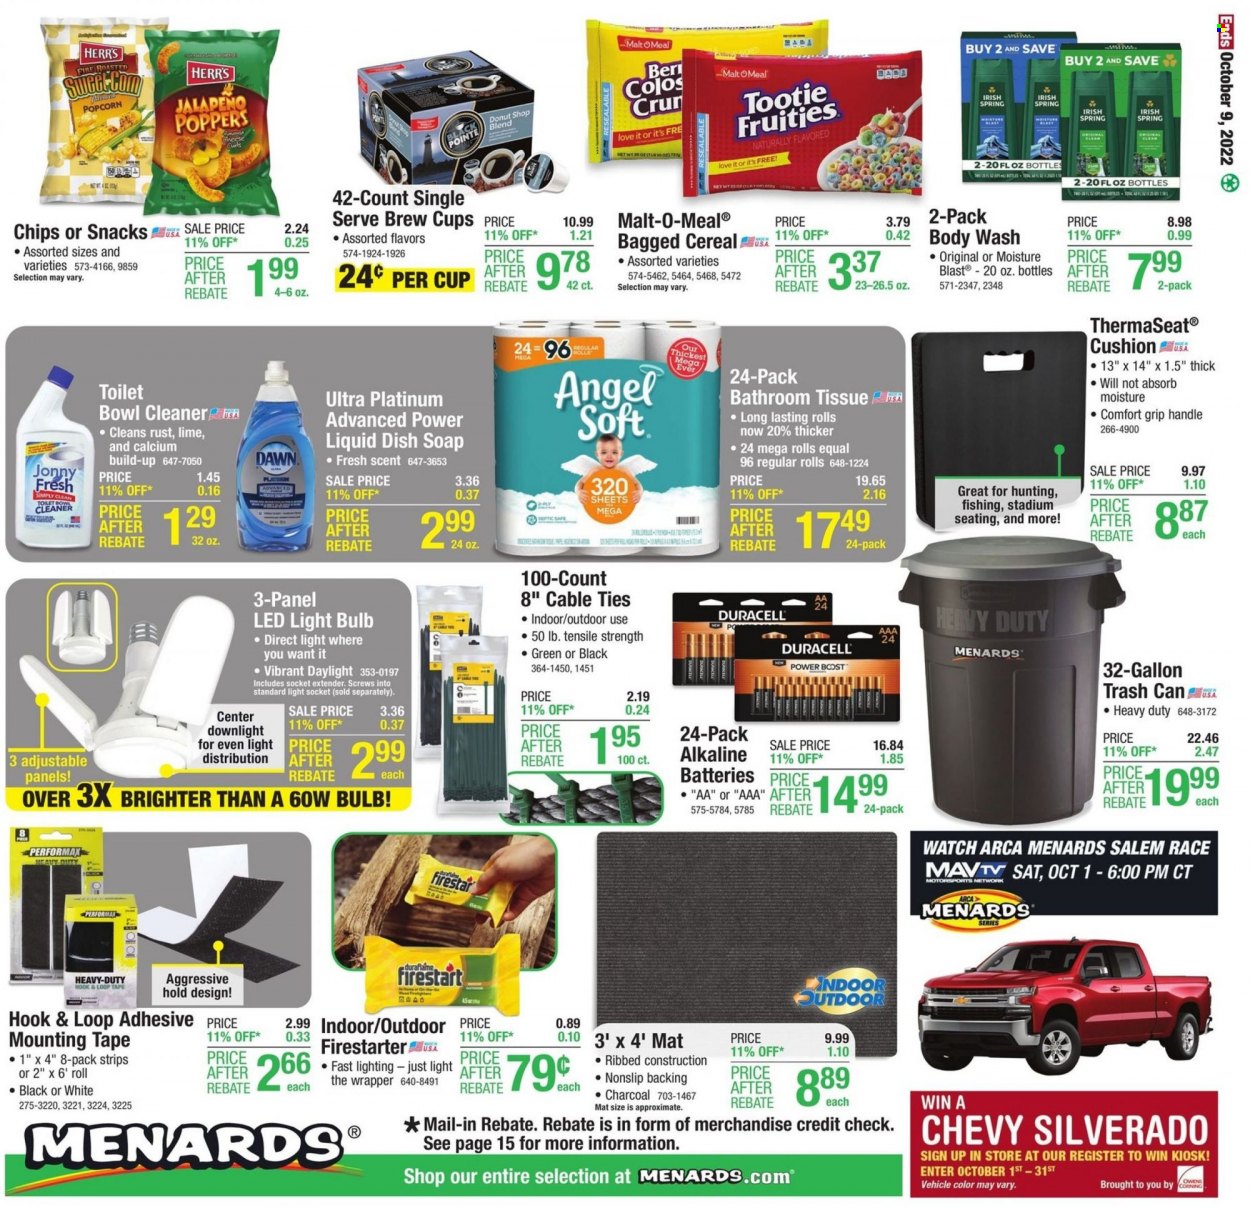 thumbnail - Menards Flyer - 09/29/2022 - 10/09/2022 - Sales products - jalapeño, cheese, strips, chips, popcorn, malt, cereals, Boost, bath tissue, cleaner, toilet bowl, body wash, soap, wrapper, gallon, trash can, cup, bulb, Duracell, LED bulb, light bulb, watch, vehicle, adhesive, LED light, lighting. Page 22.